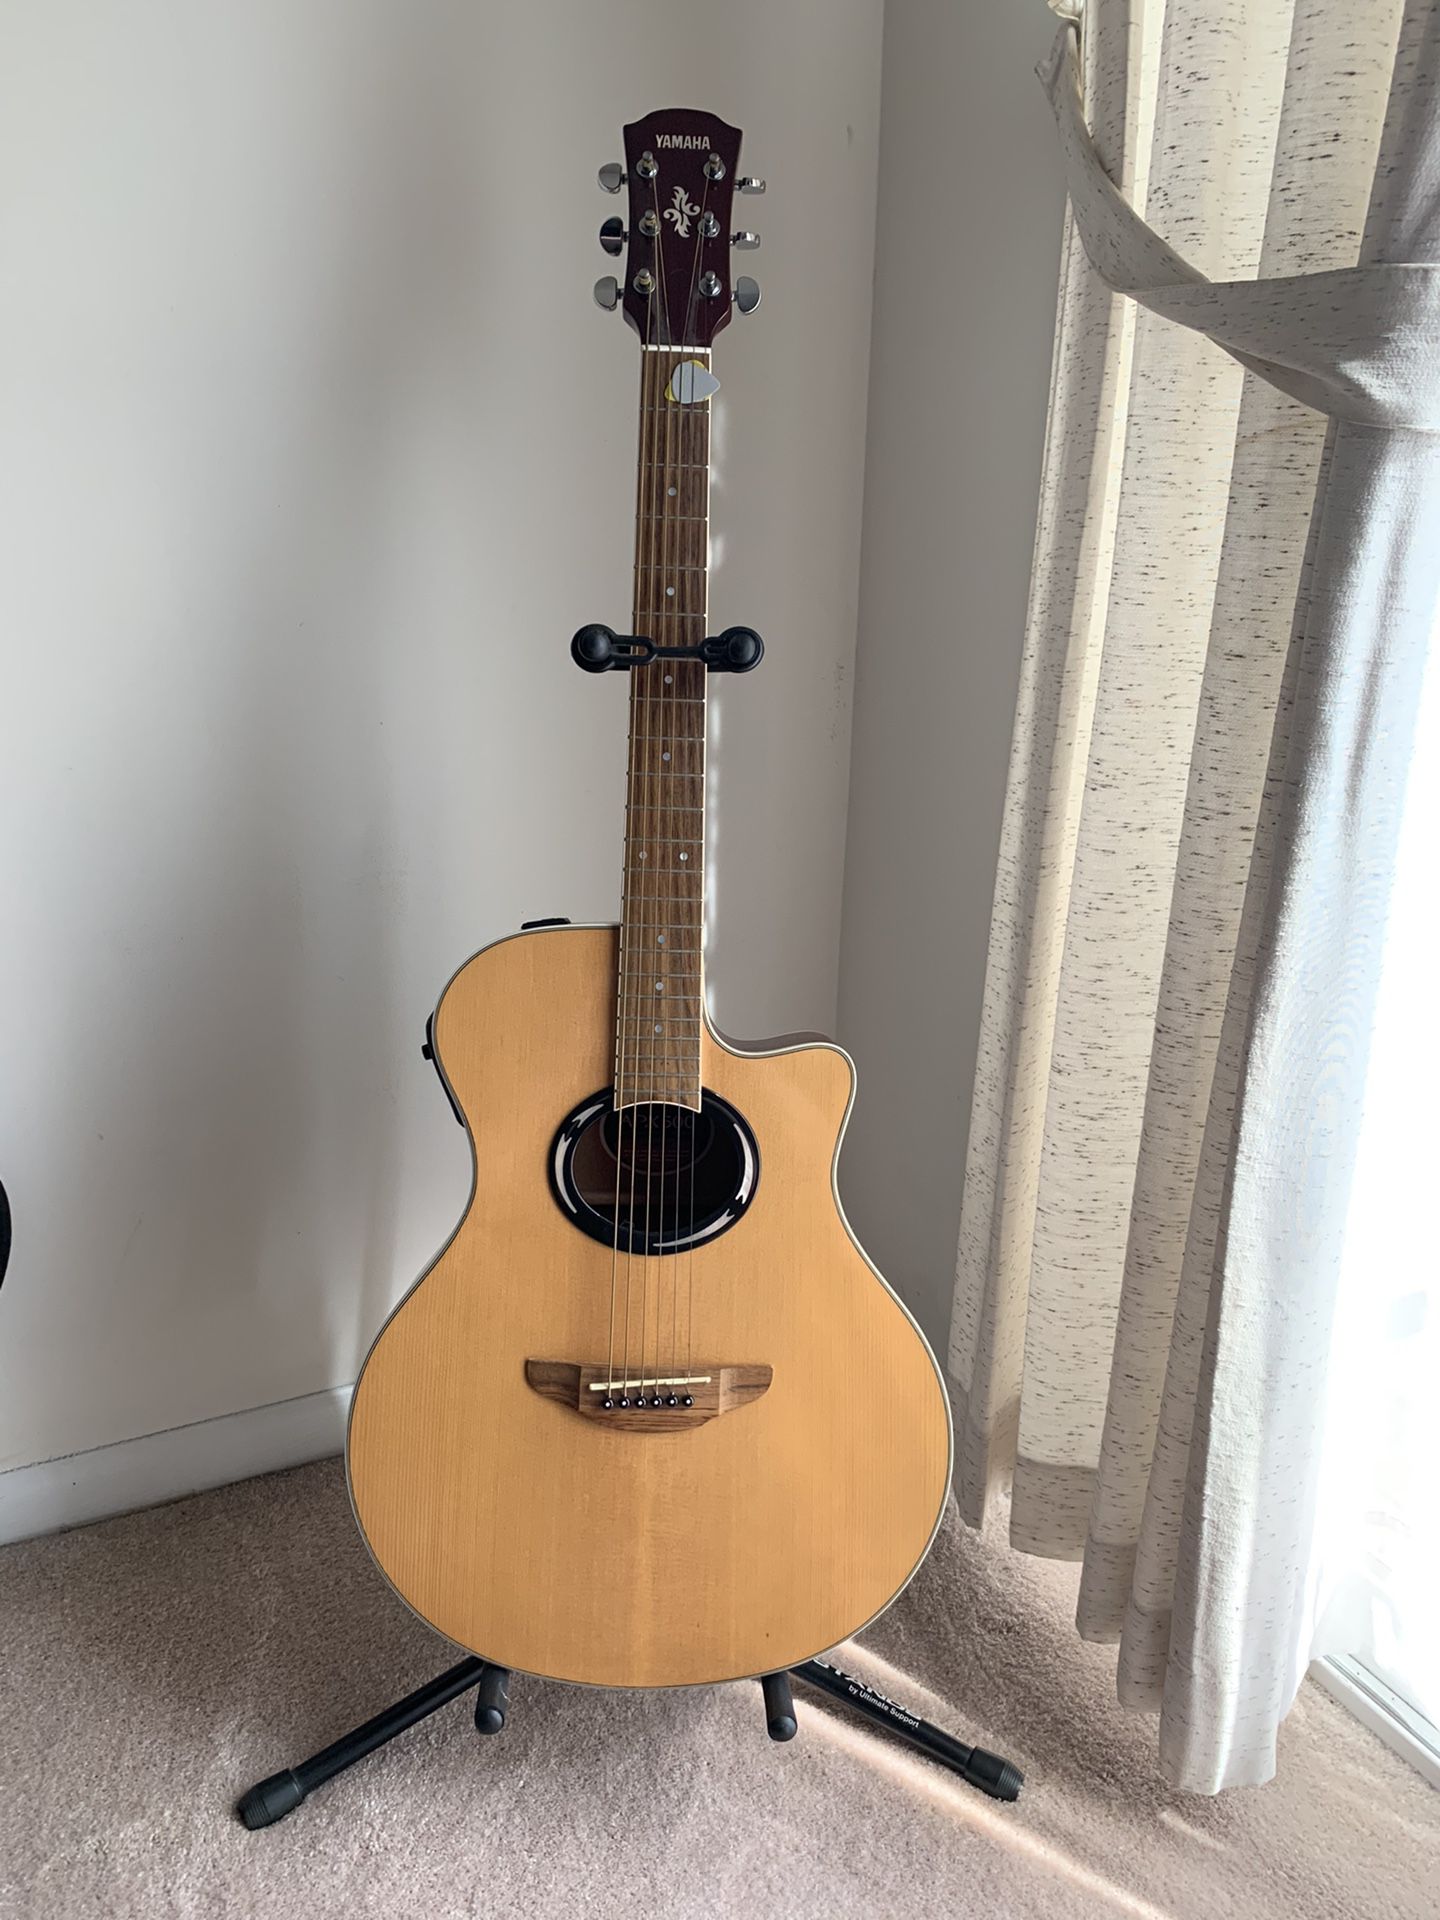 Yamaha APX 500 Acoustic Electric Guitar with Stand. Like new!